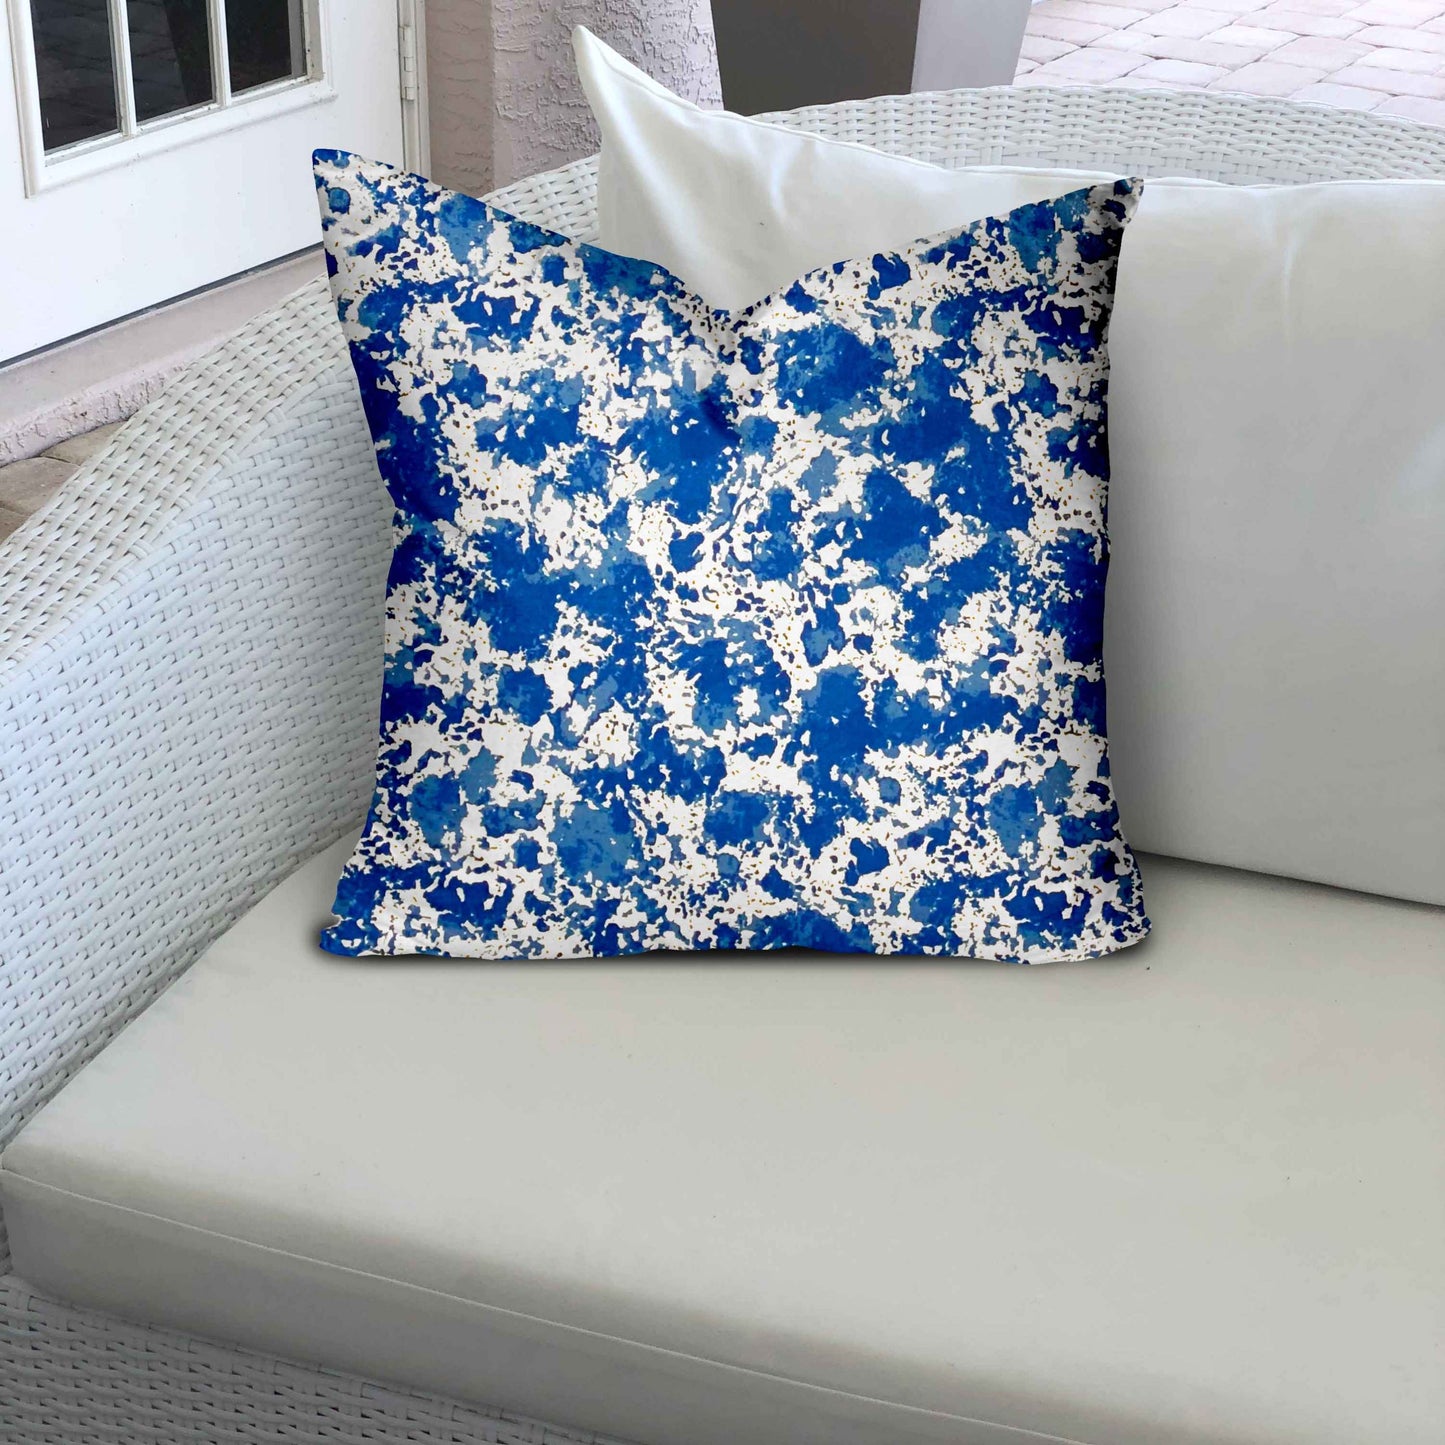 SANDY Indoor/Outdoor Soft Royal Pillow, Zipper Cover Only, 24x24